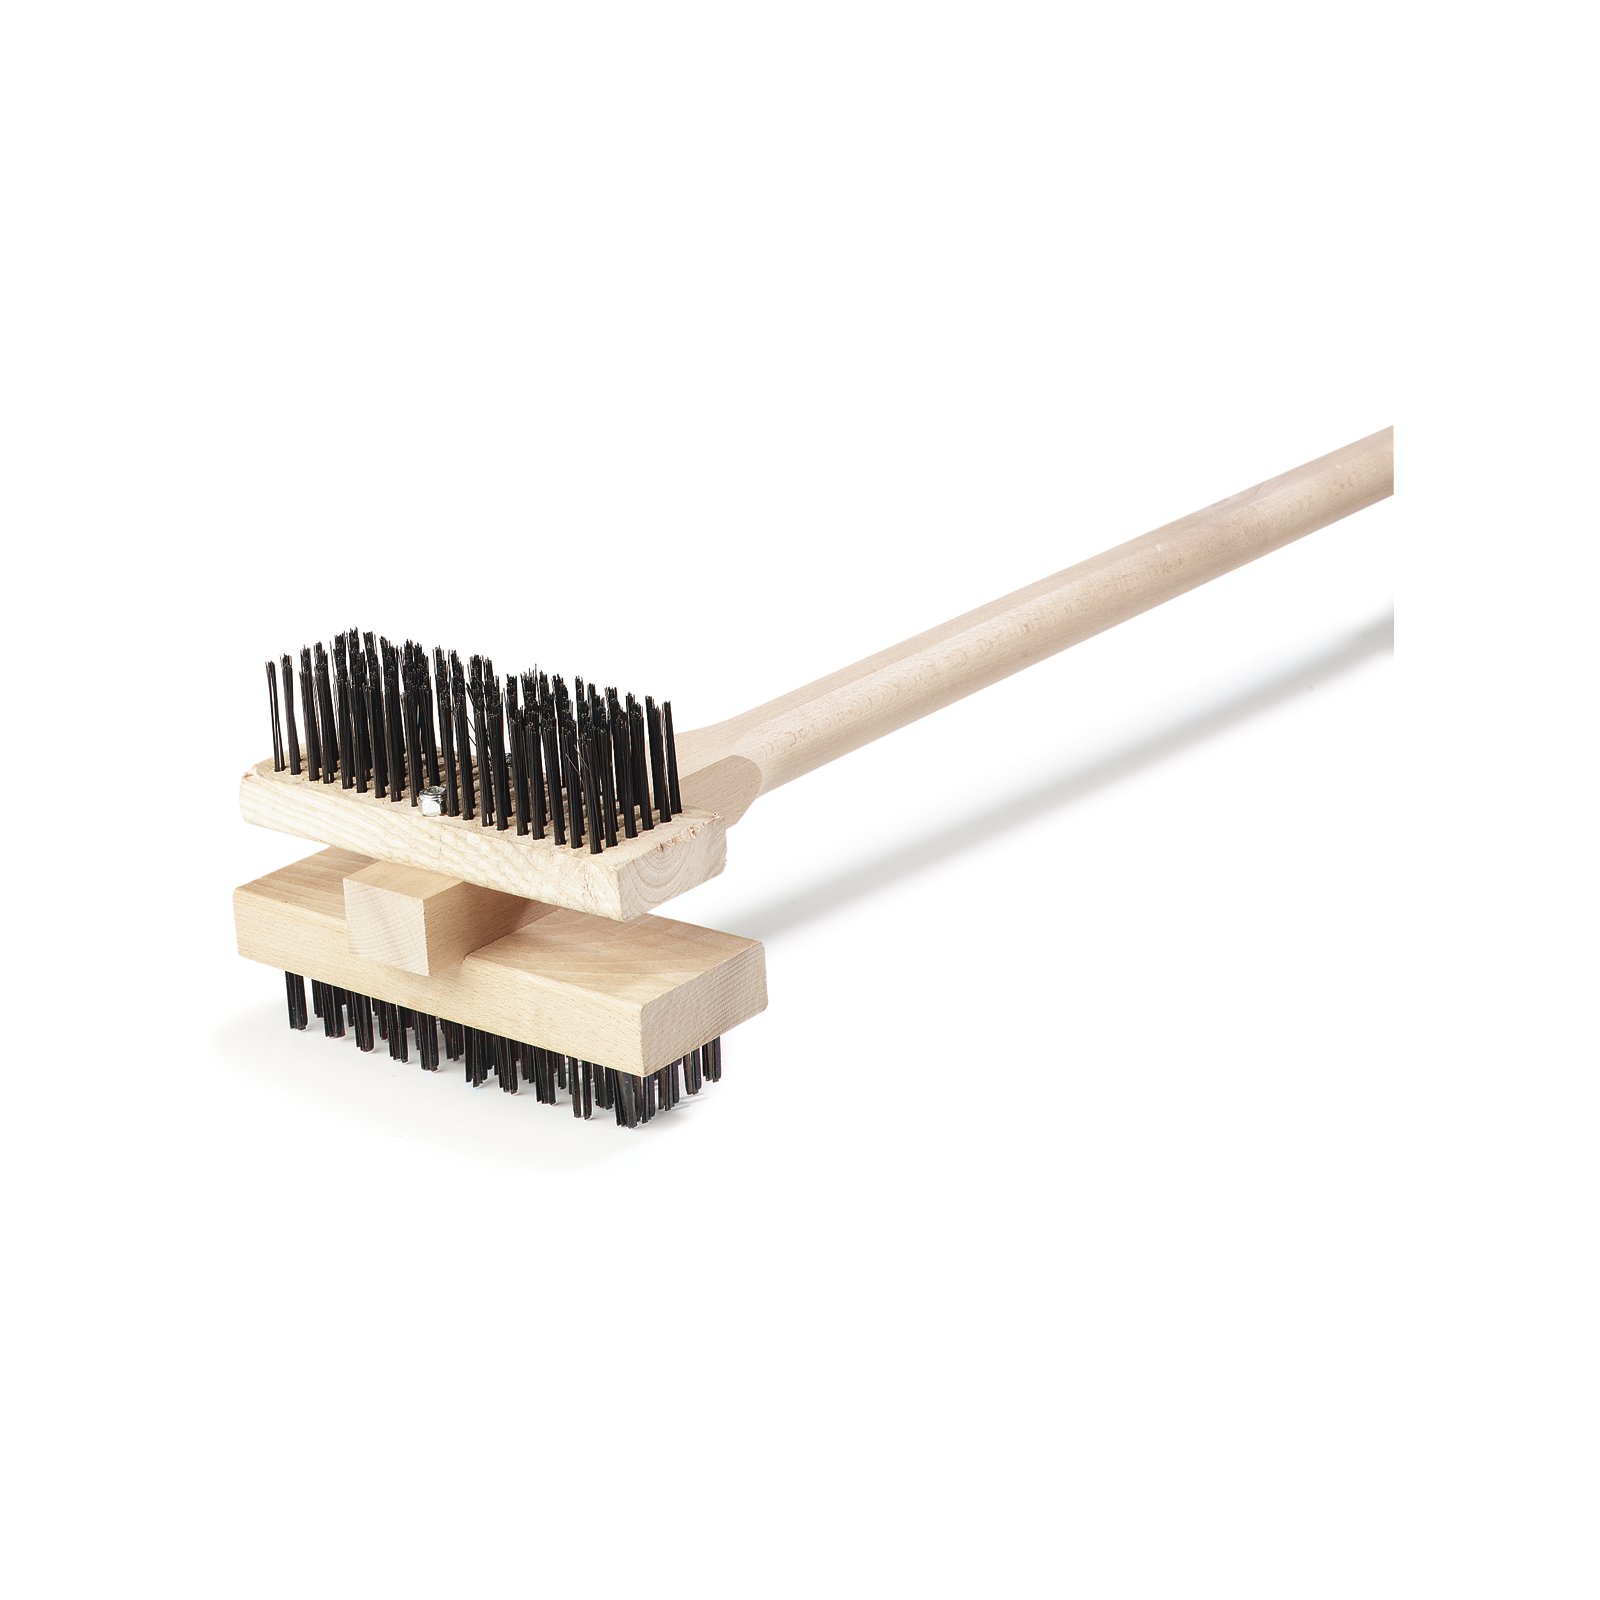 Carlisle 4002600 Sparta Broiler Master Grill Brush with 30 1/2